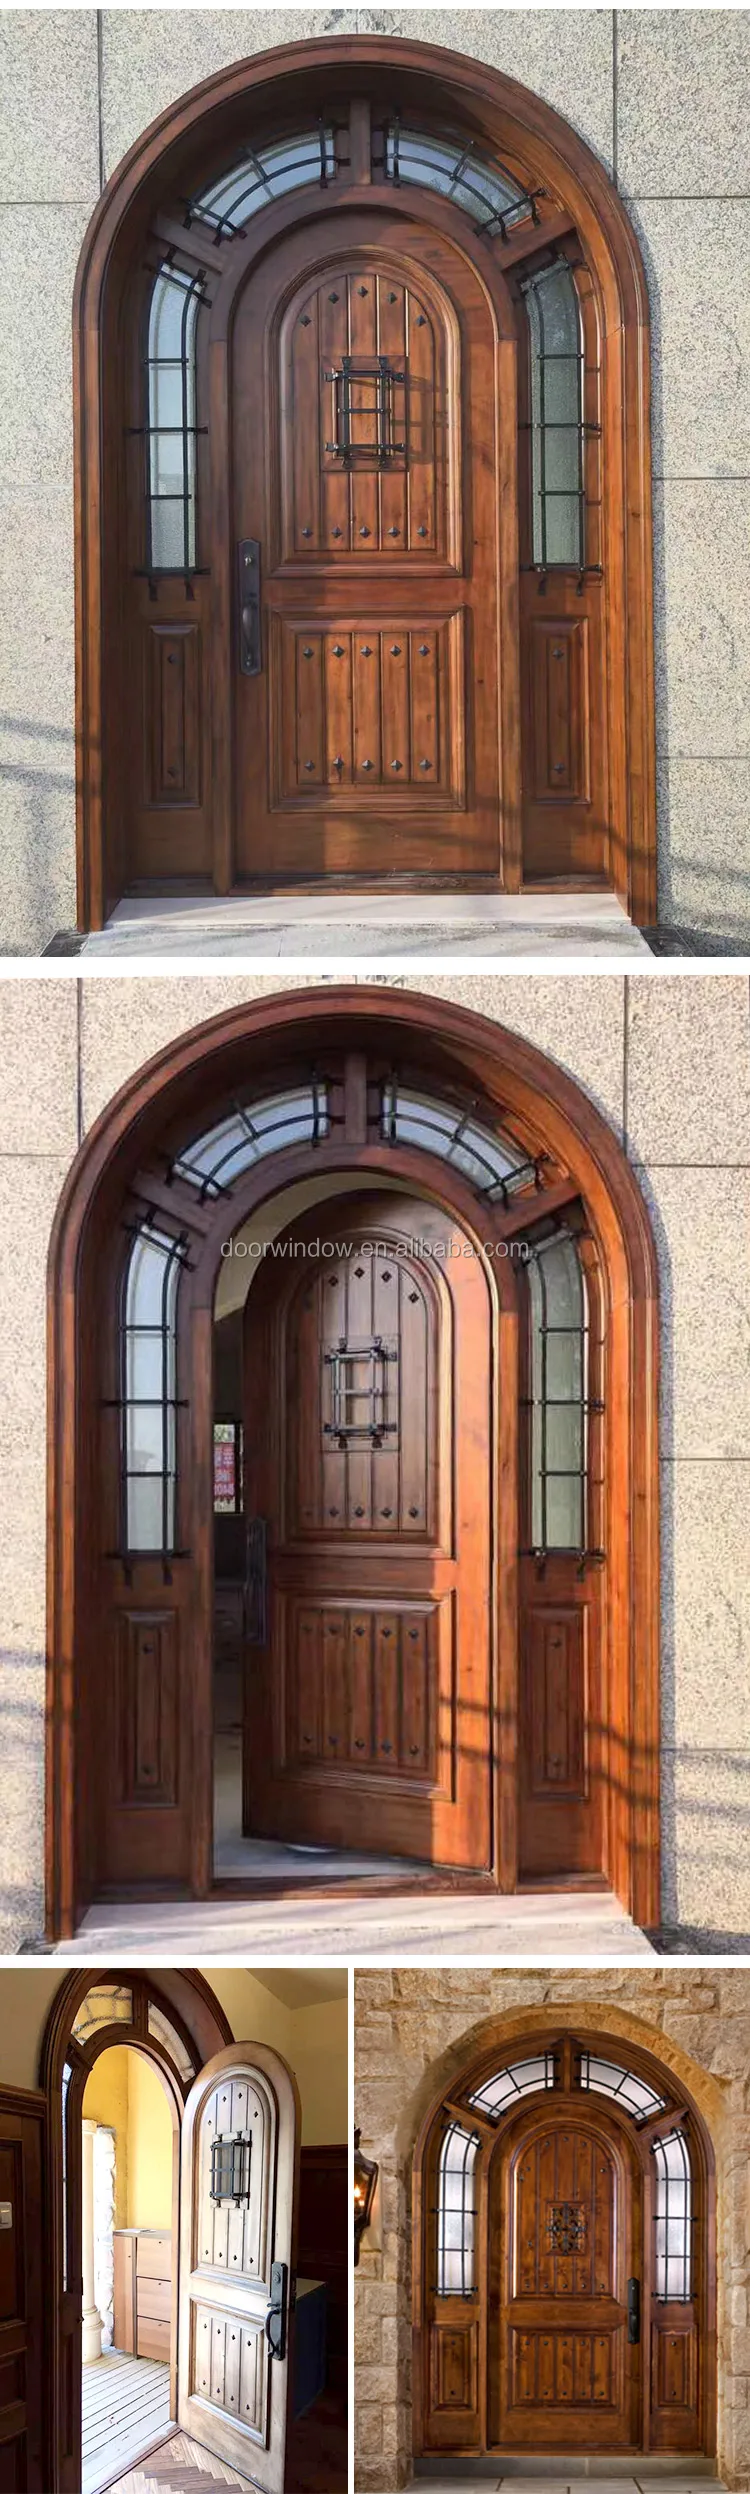 2018 Latest Design Knotty Alder Wood Doors with Glass Entry Doors Outside Front Doors